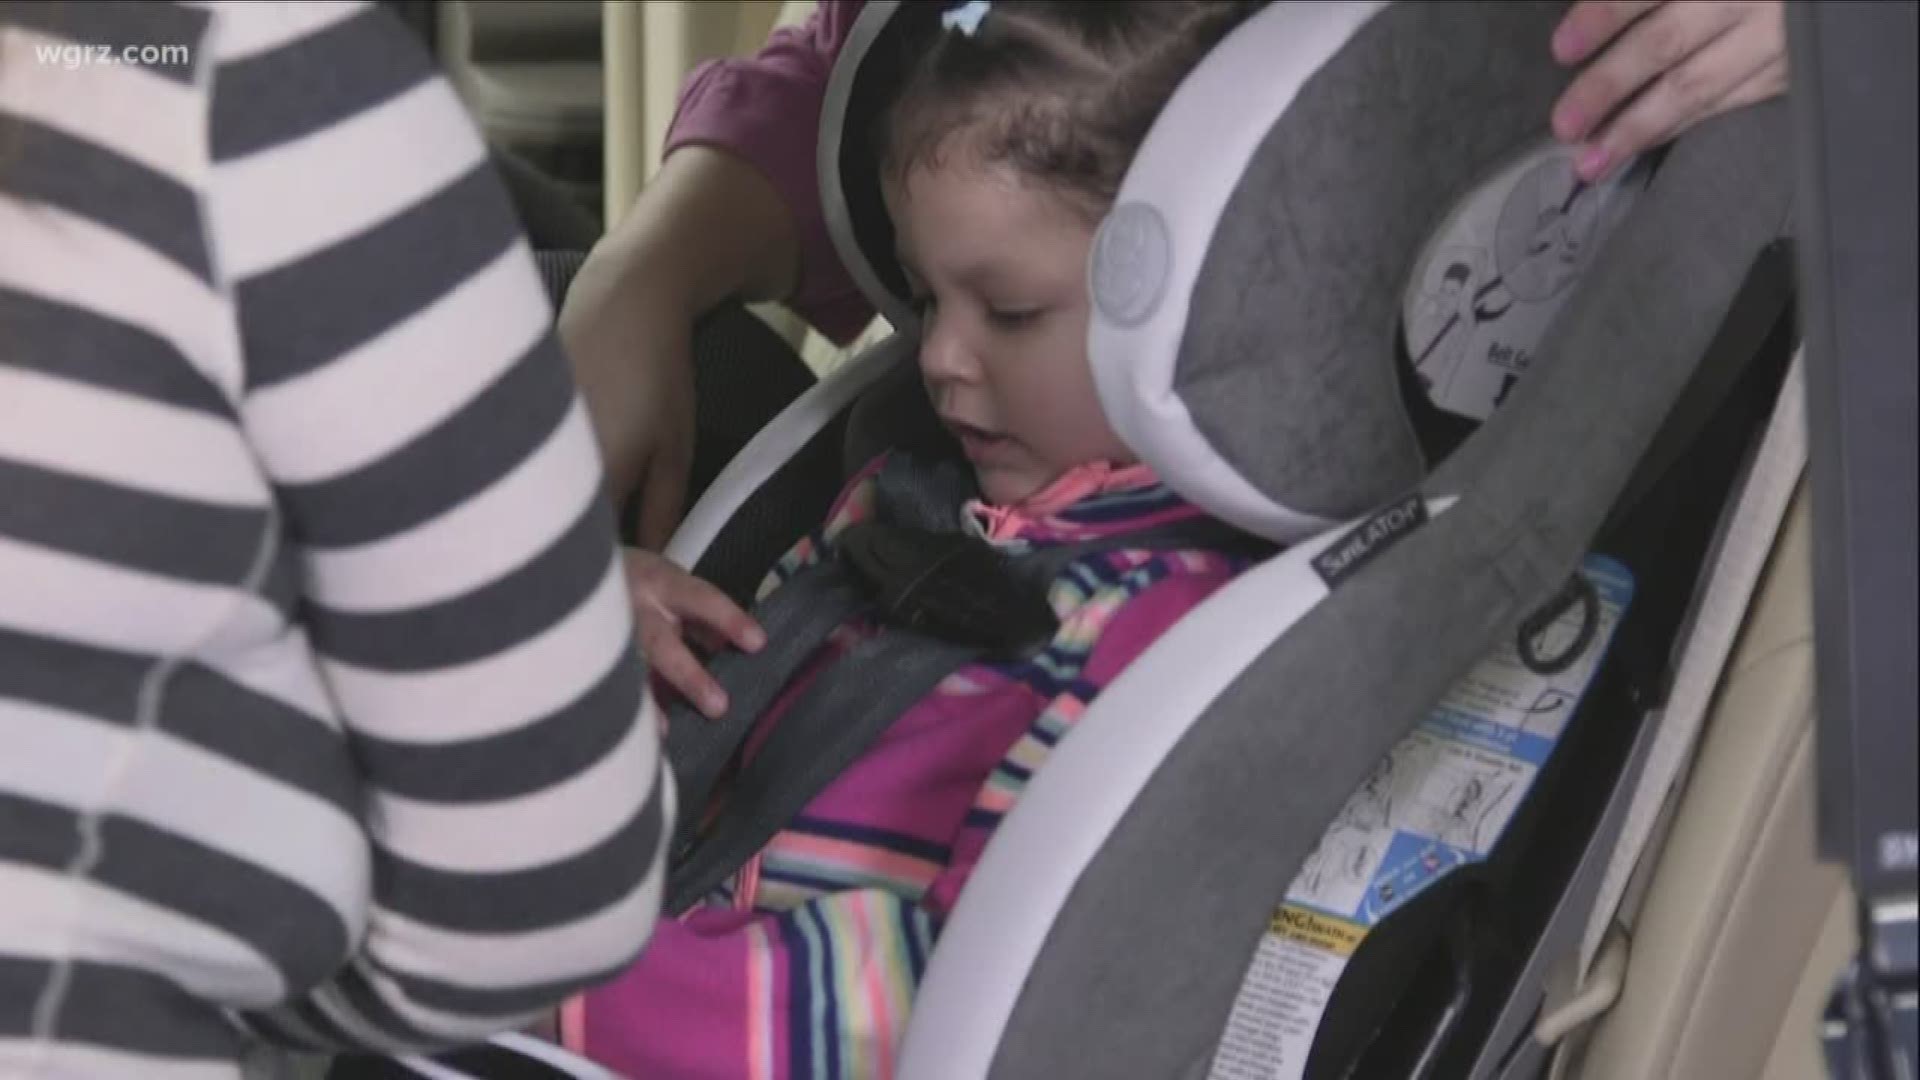 New car seat regulations are now in effect here in New York State, and they're going to impact a lot of parents.